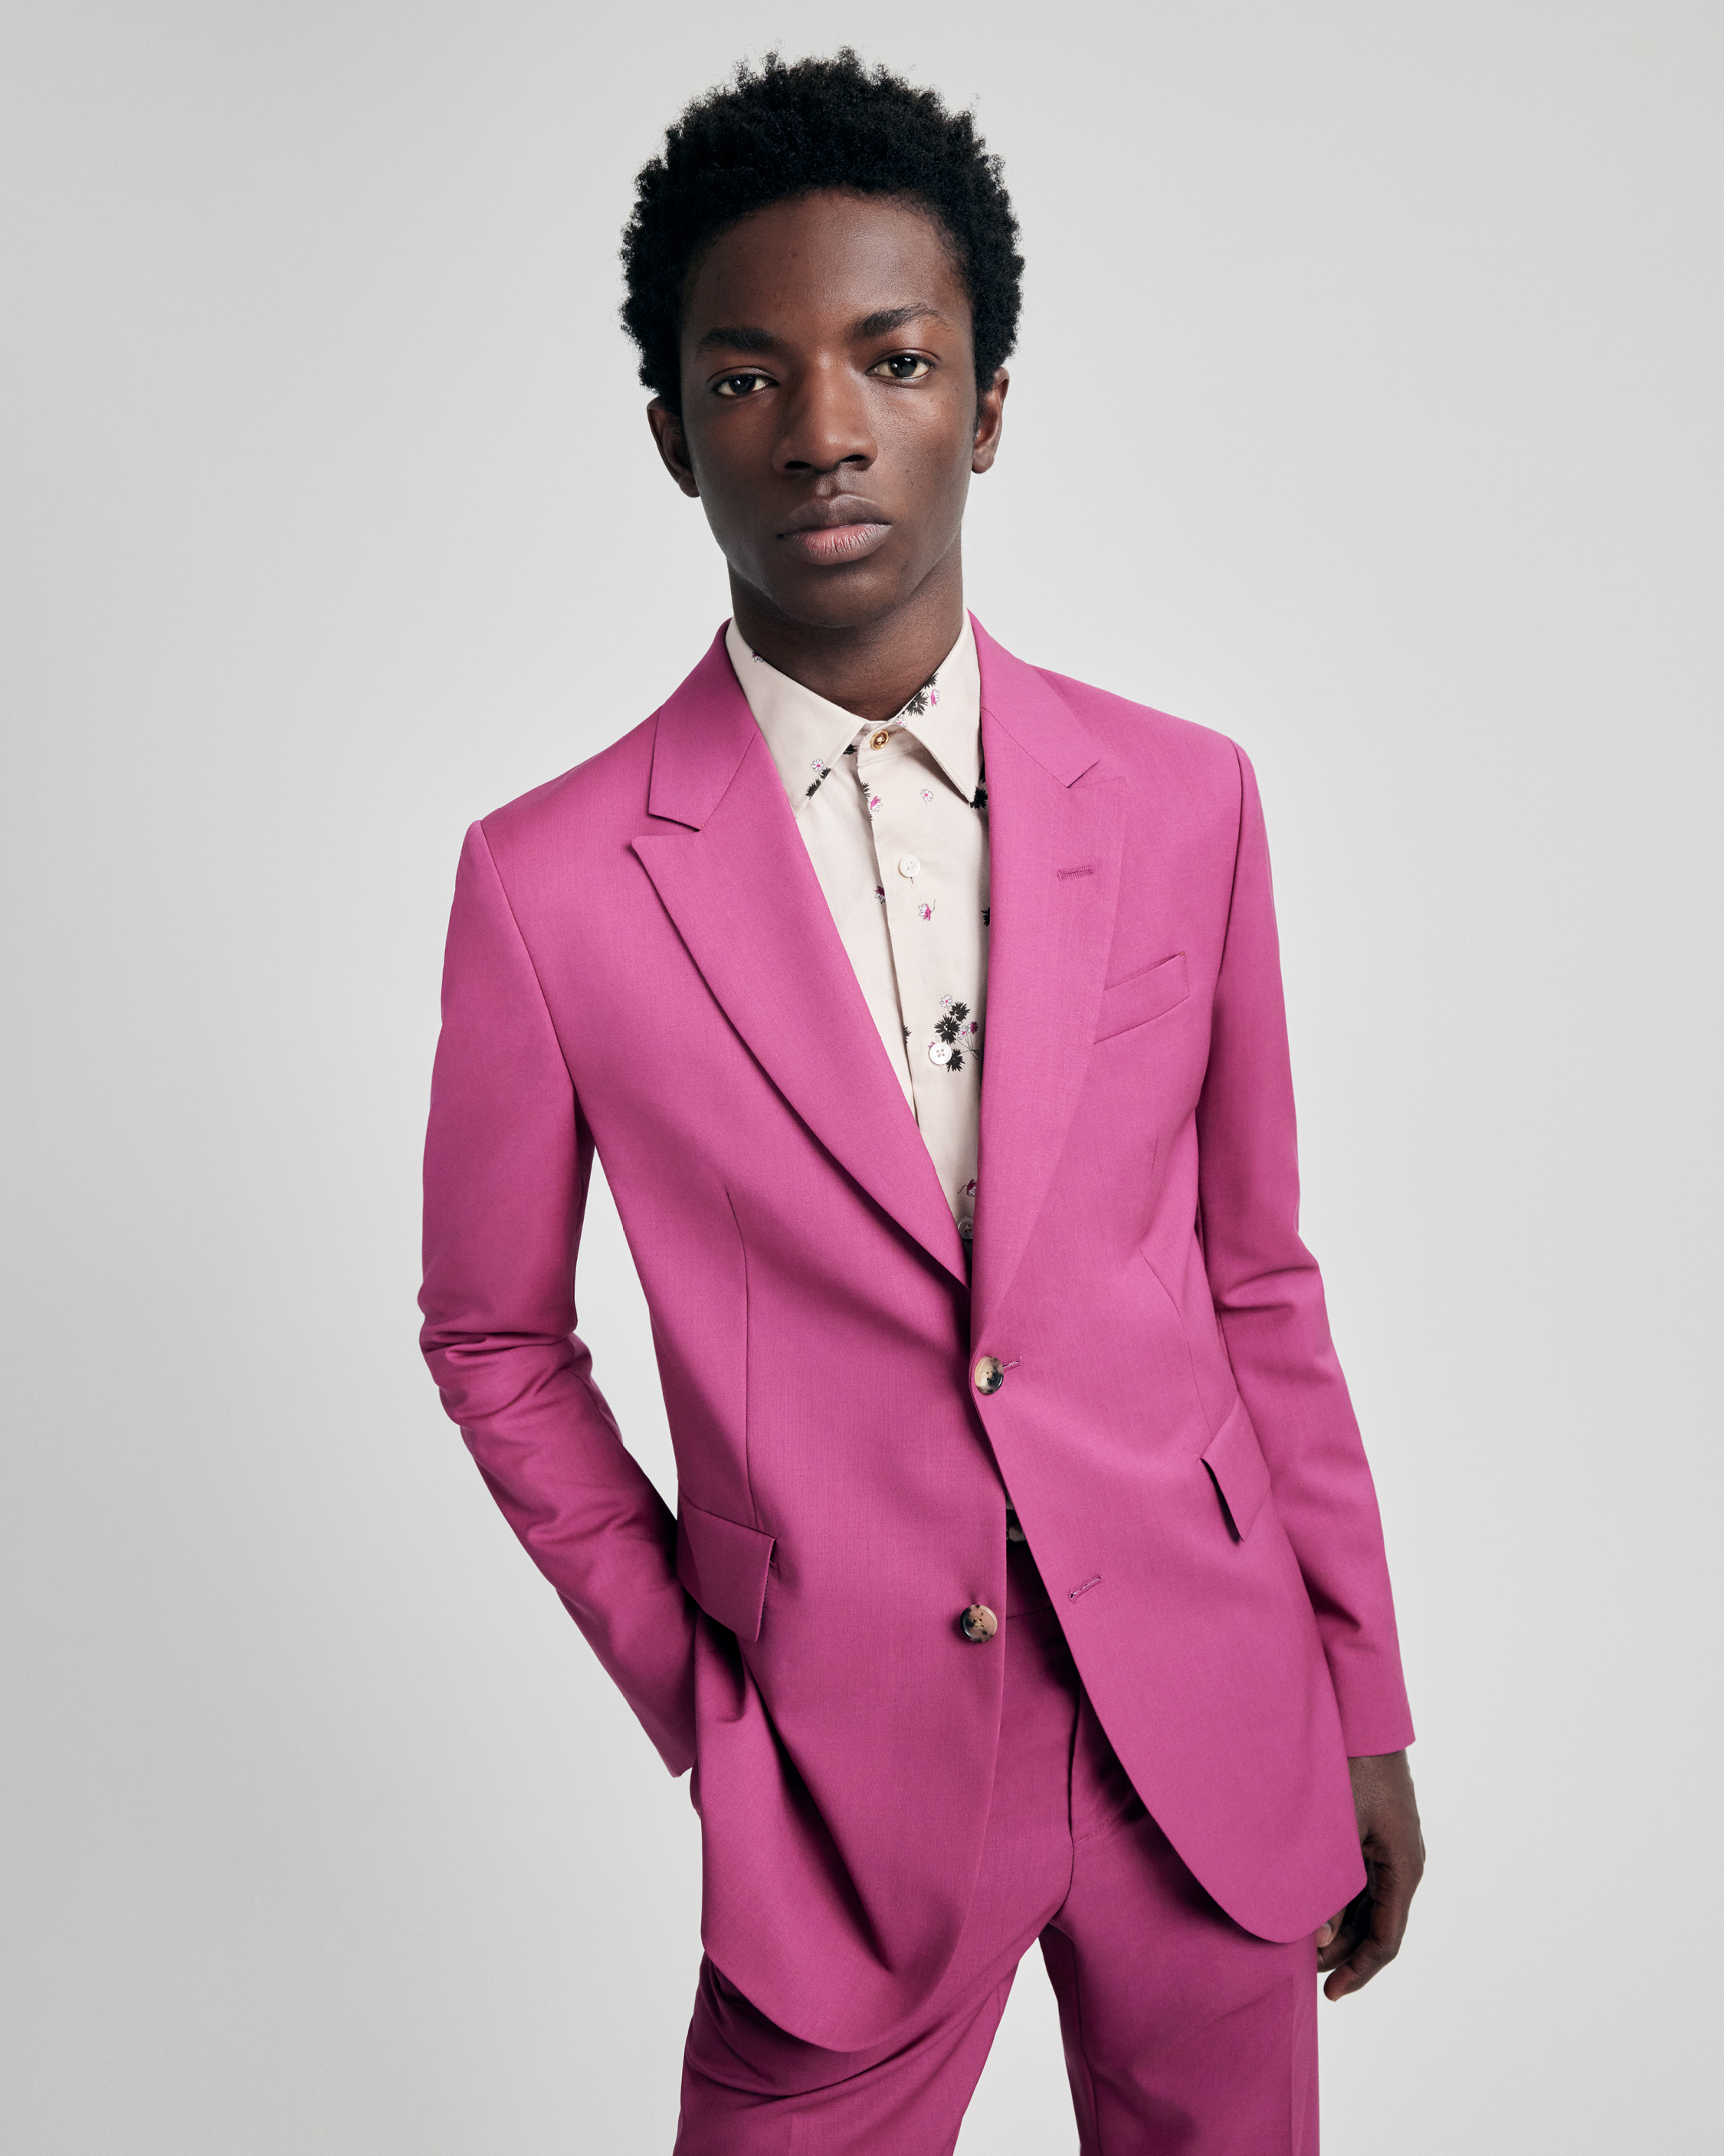 Paul Smith | Discover More